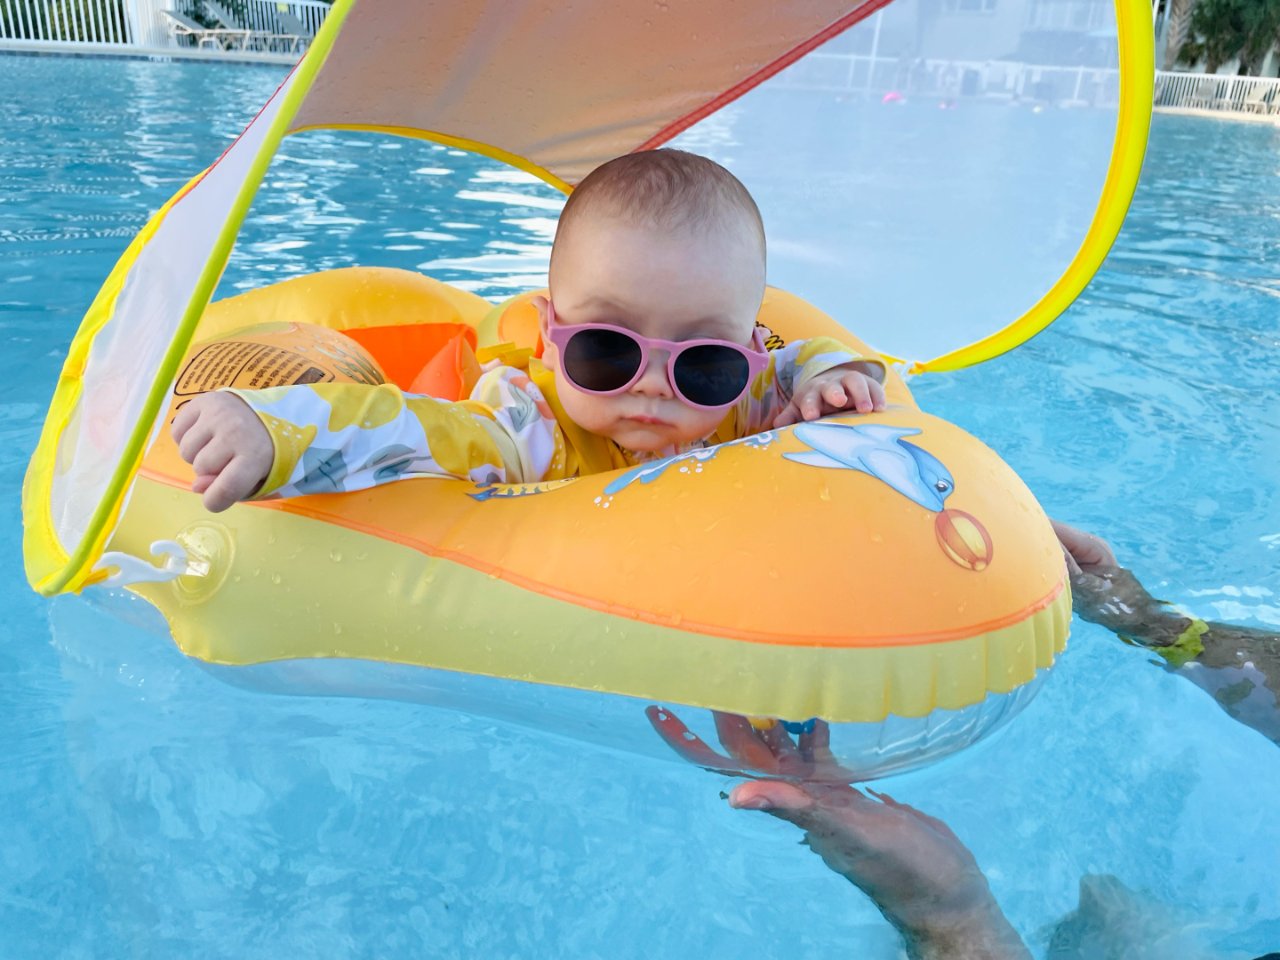 No Flip Over Baby Pool Float with Canopy UPF50+ Sun Protection, Inflatable Baby Float with Sponge Safety Support Bottom, Fun Gifts Water Toy Accessory Baby Swim Floats for Pool 3-36 Month : Toys & Games